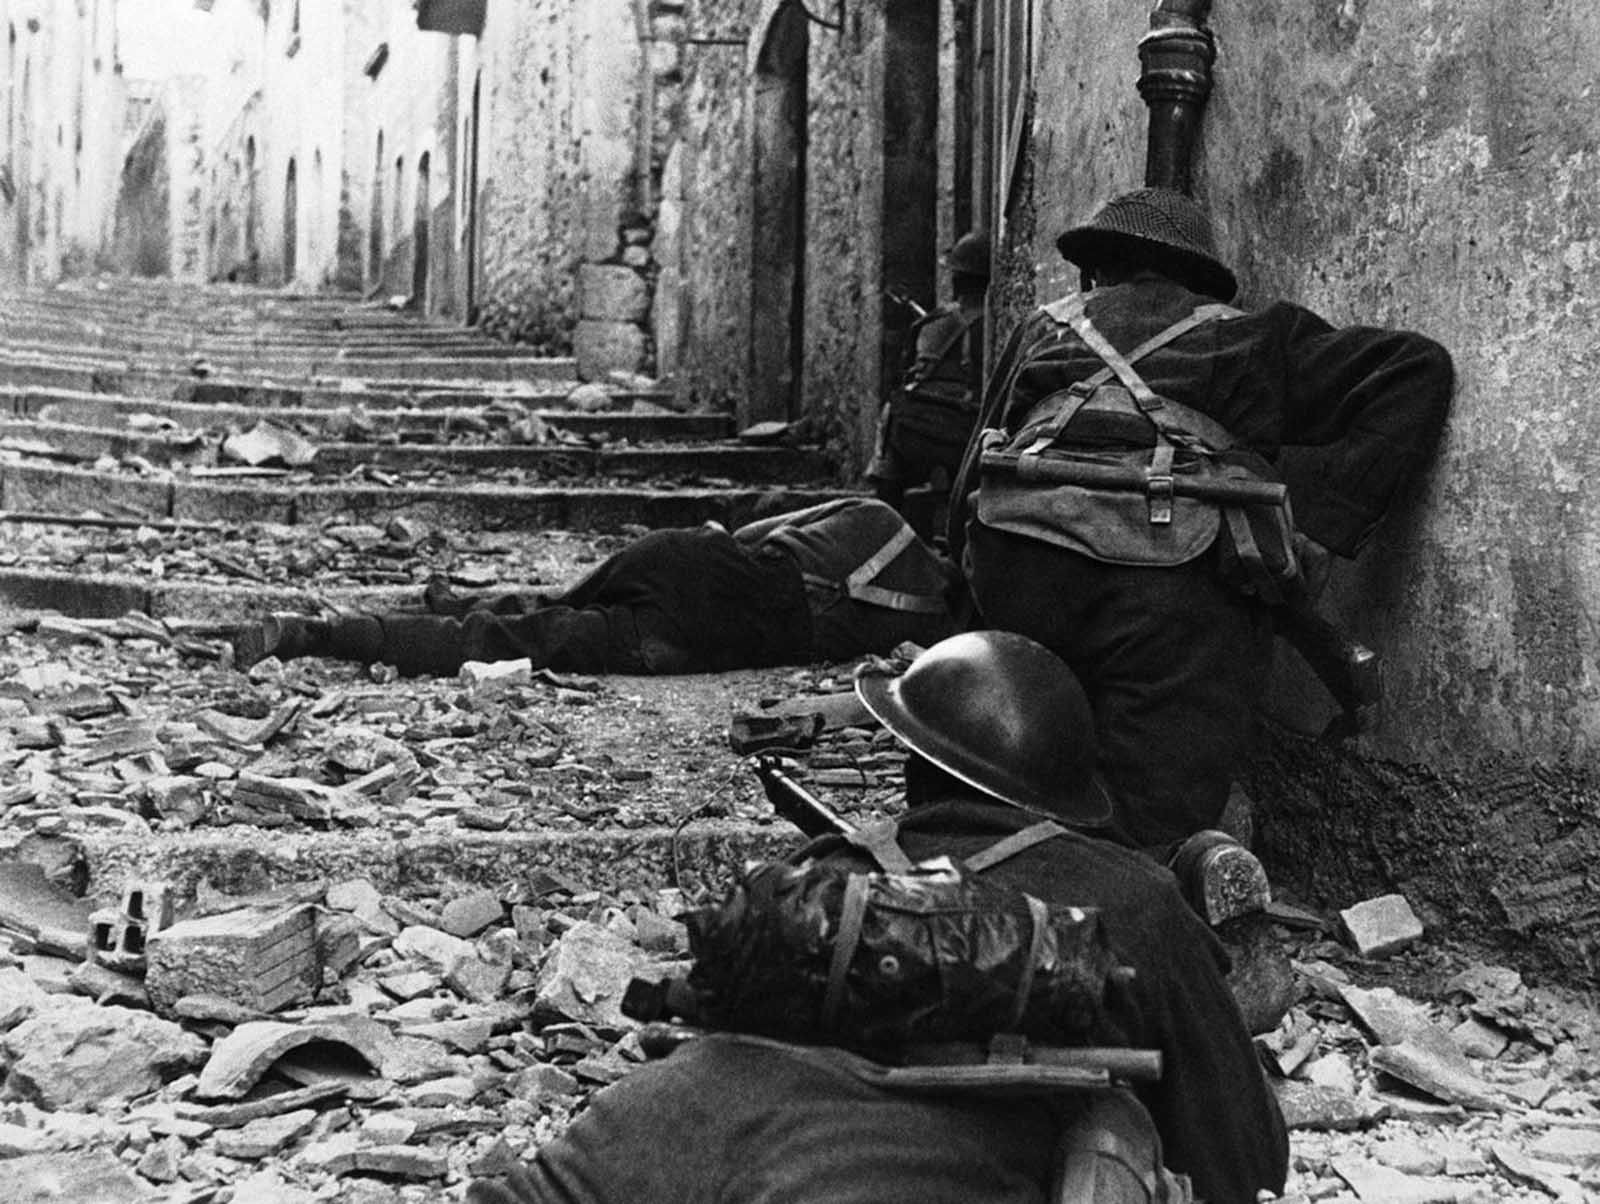 Over the body of a dead comrade, Canadian infantrymen advance cautiously up a narrow lane in Campochiaro, Italy, on November 11, 1943. The Germans left the town as the Canadians advanced, leaving only nests of snipers to delay the progress.